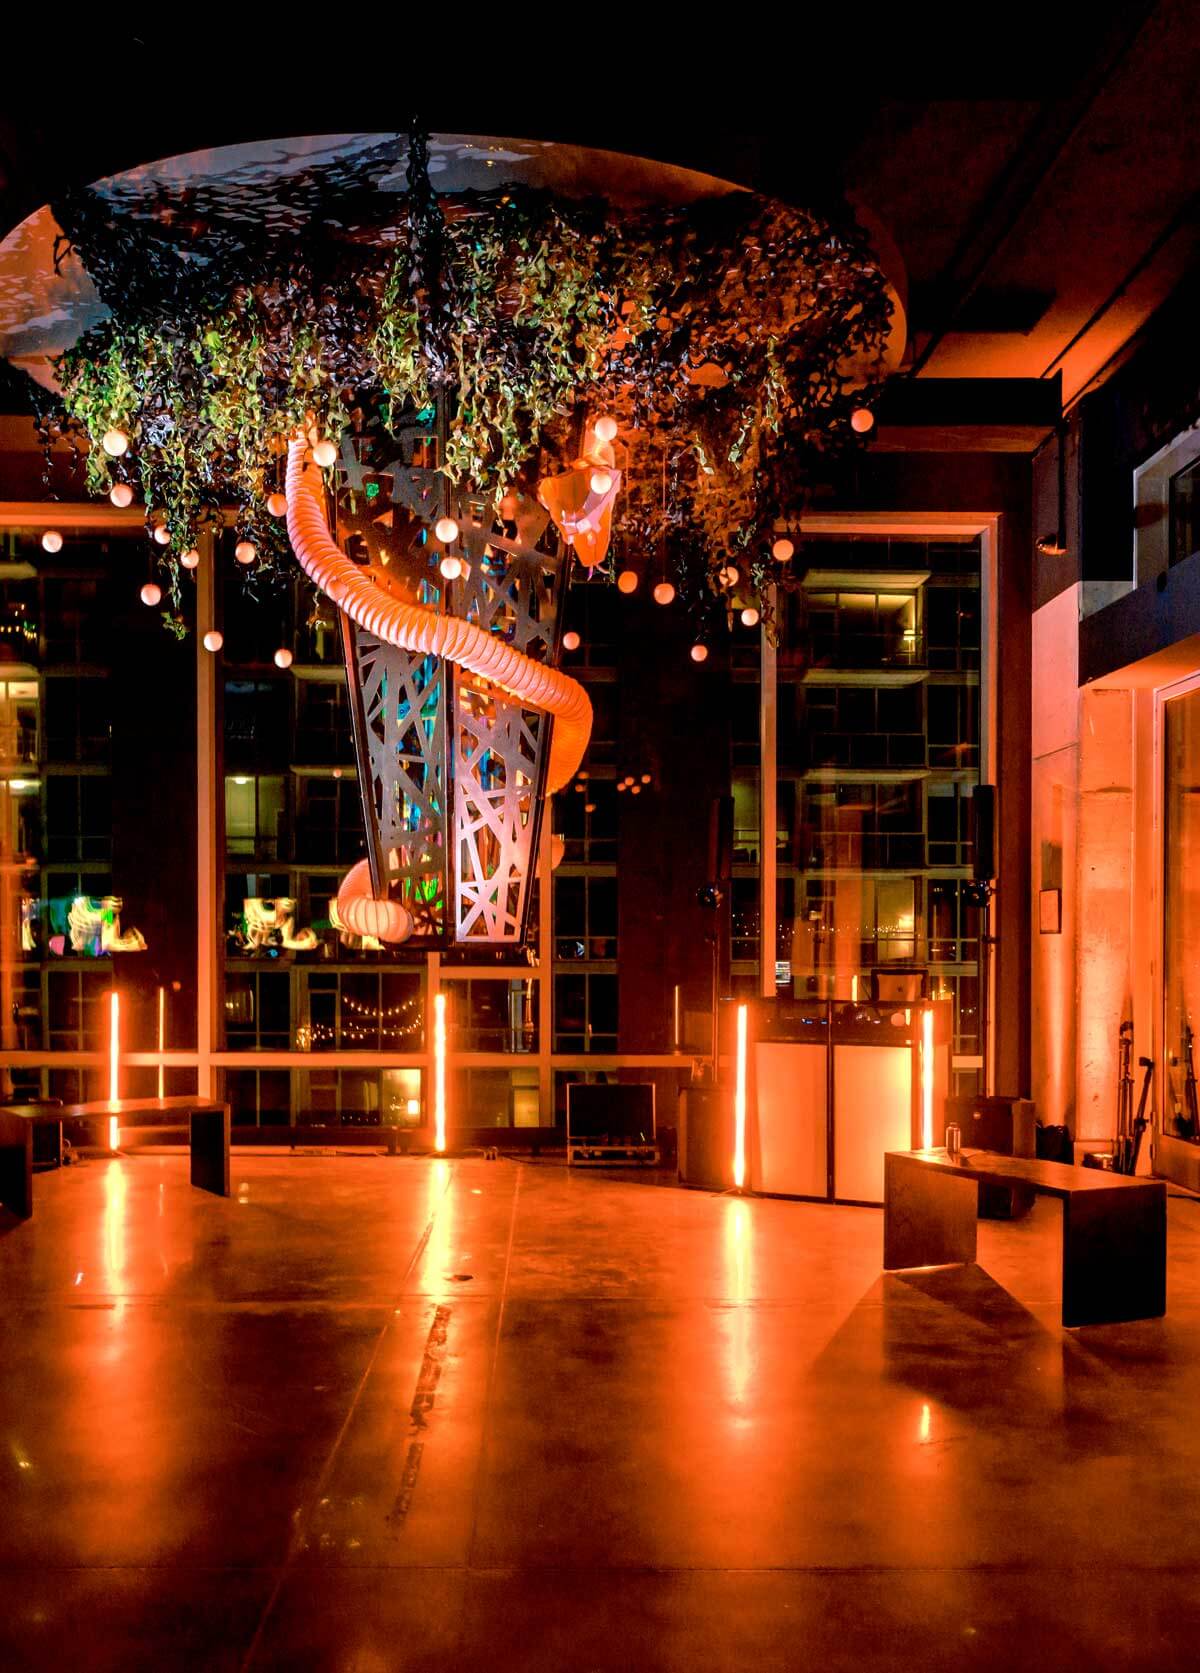 Elegant modern interior of a dimly lit space with an intricate hanging sculpture and warm ambient lighting.